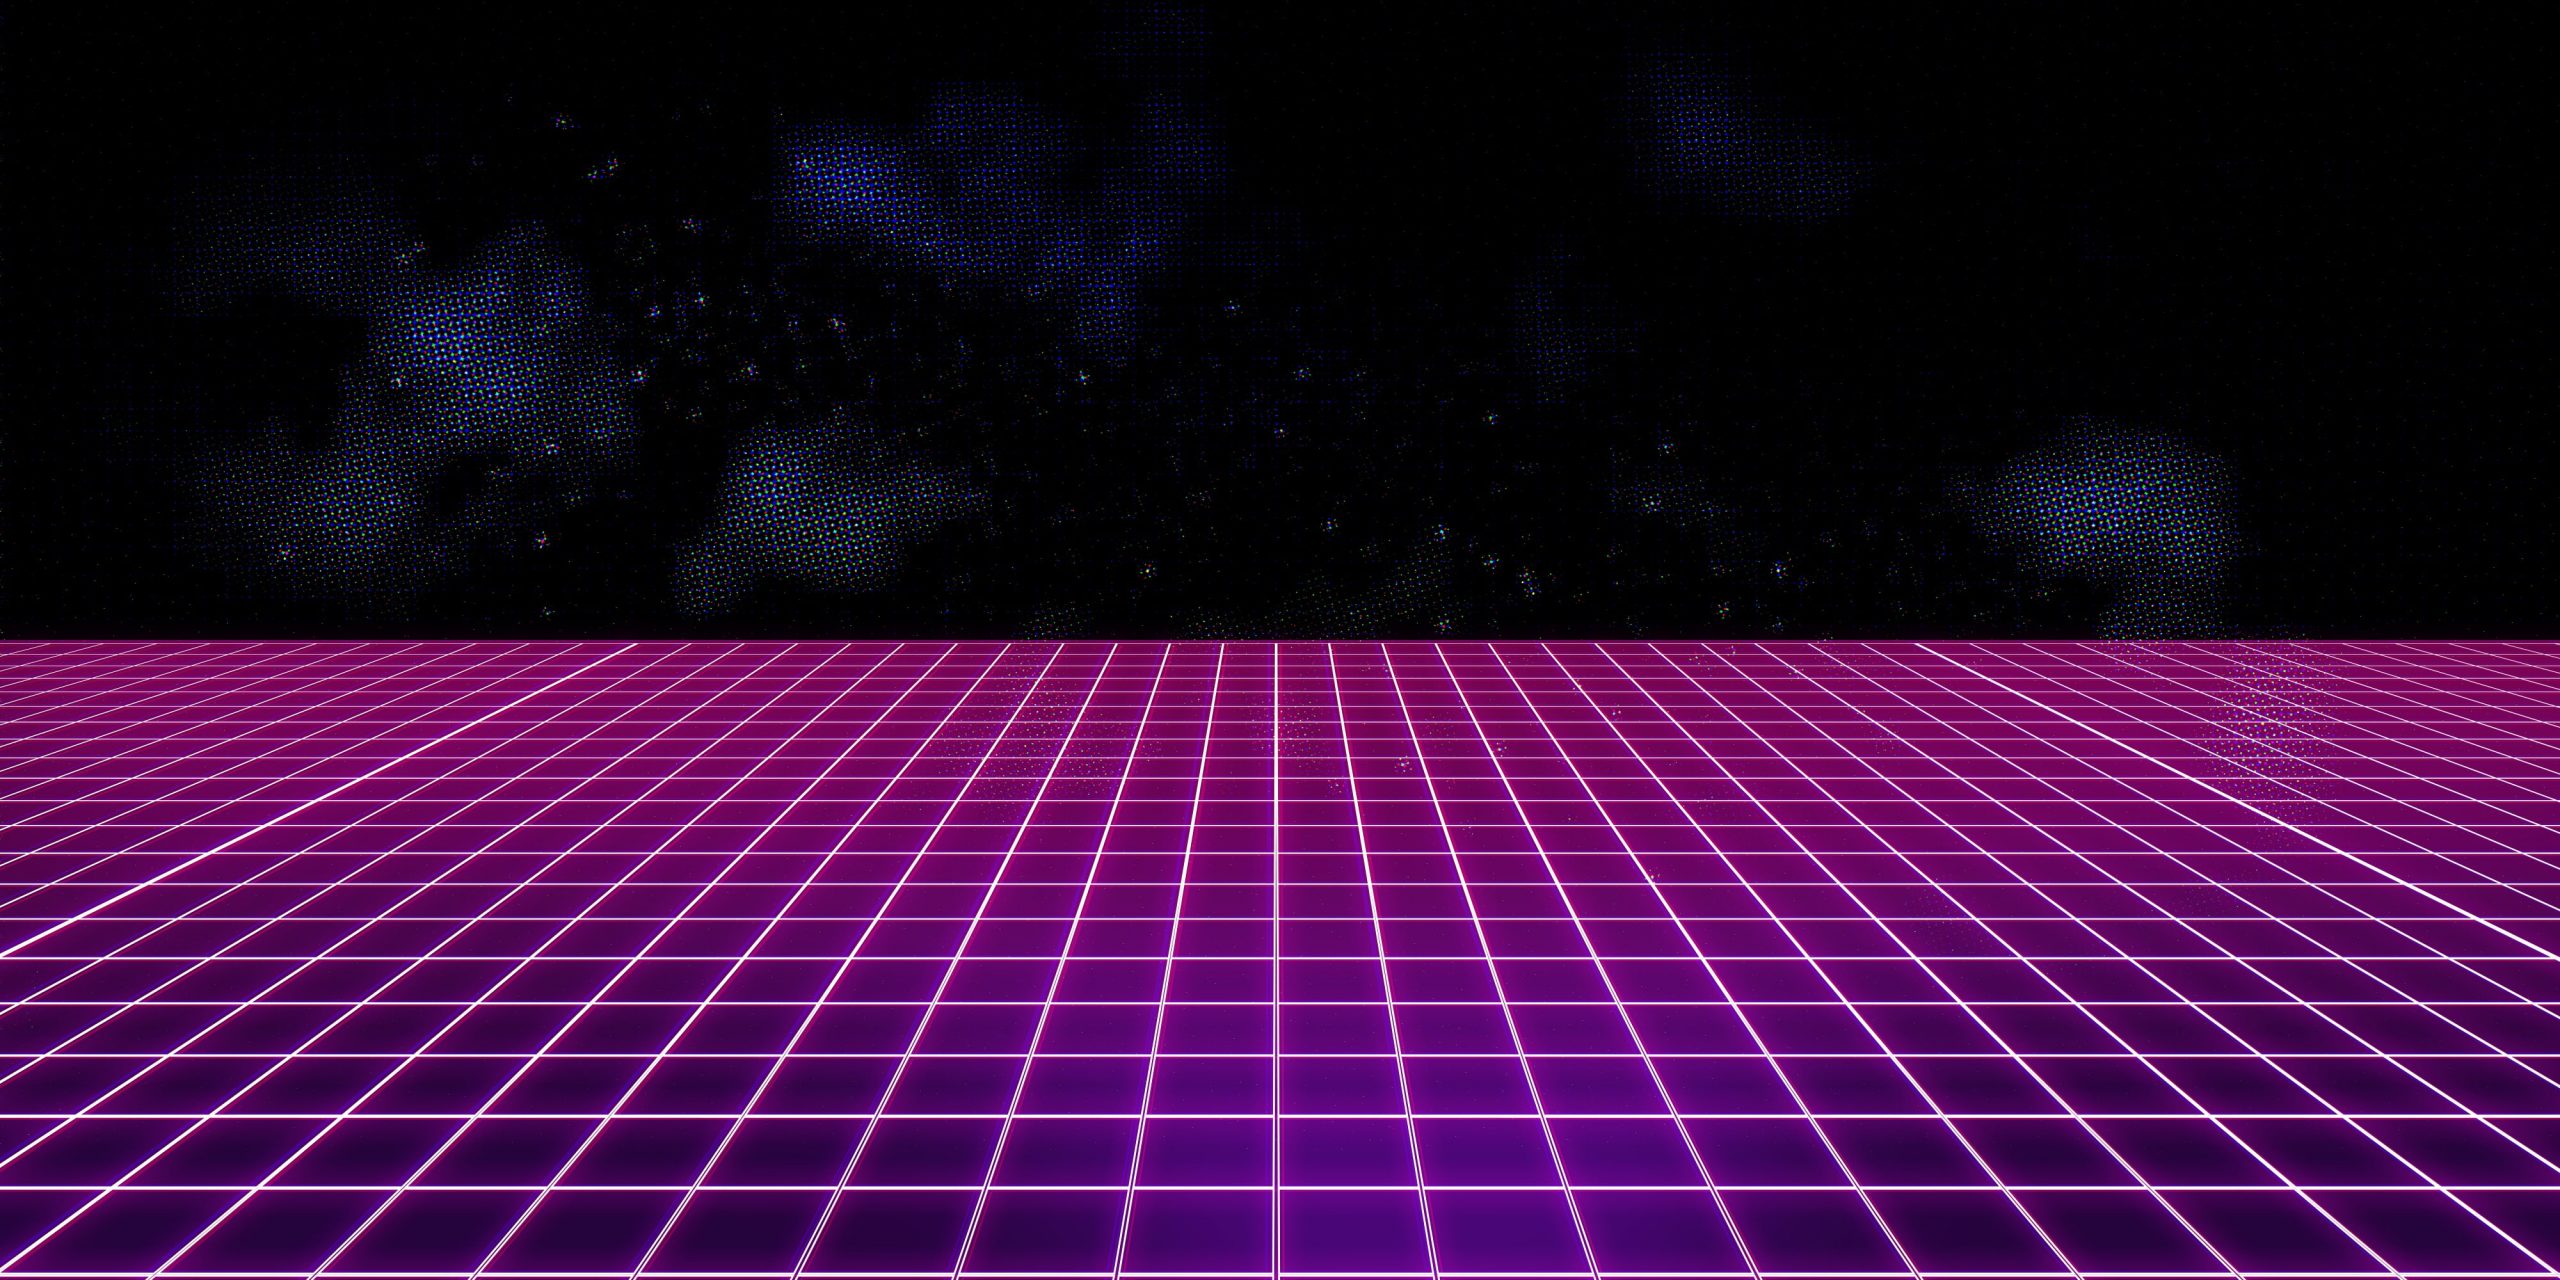 Music, Background, 80s wallpaper, Neon, VHS, 80's, Synth, Retrowave